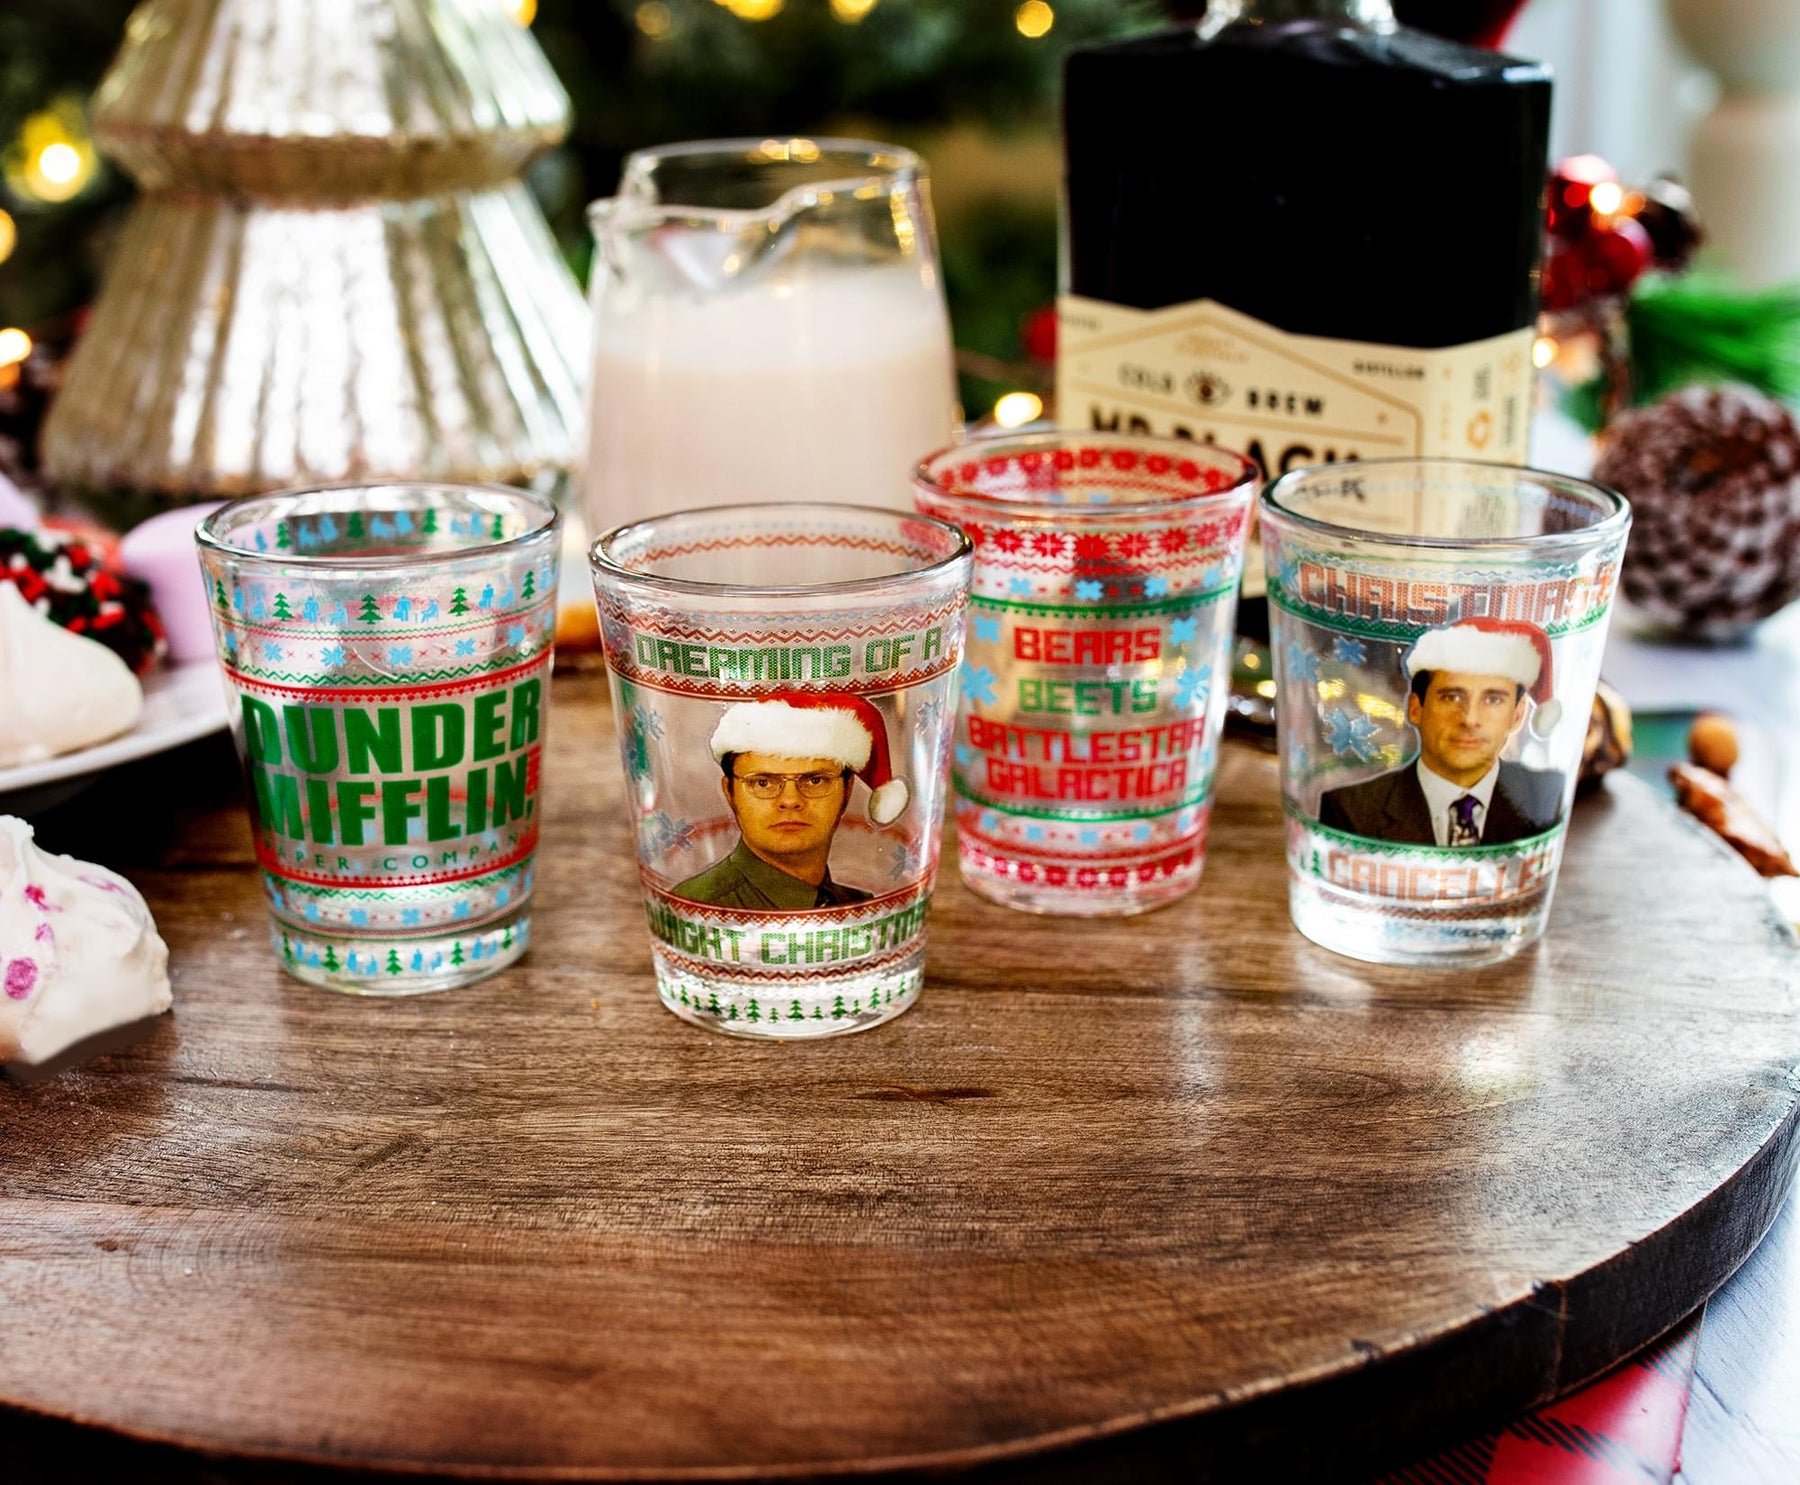 The Office Dunder Mifflin Holiday 2-Ounce Mini Shot Glasses | Set of 4